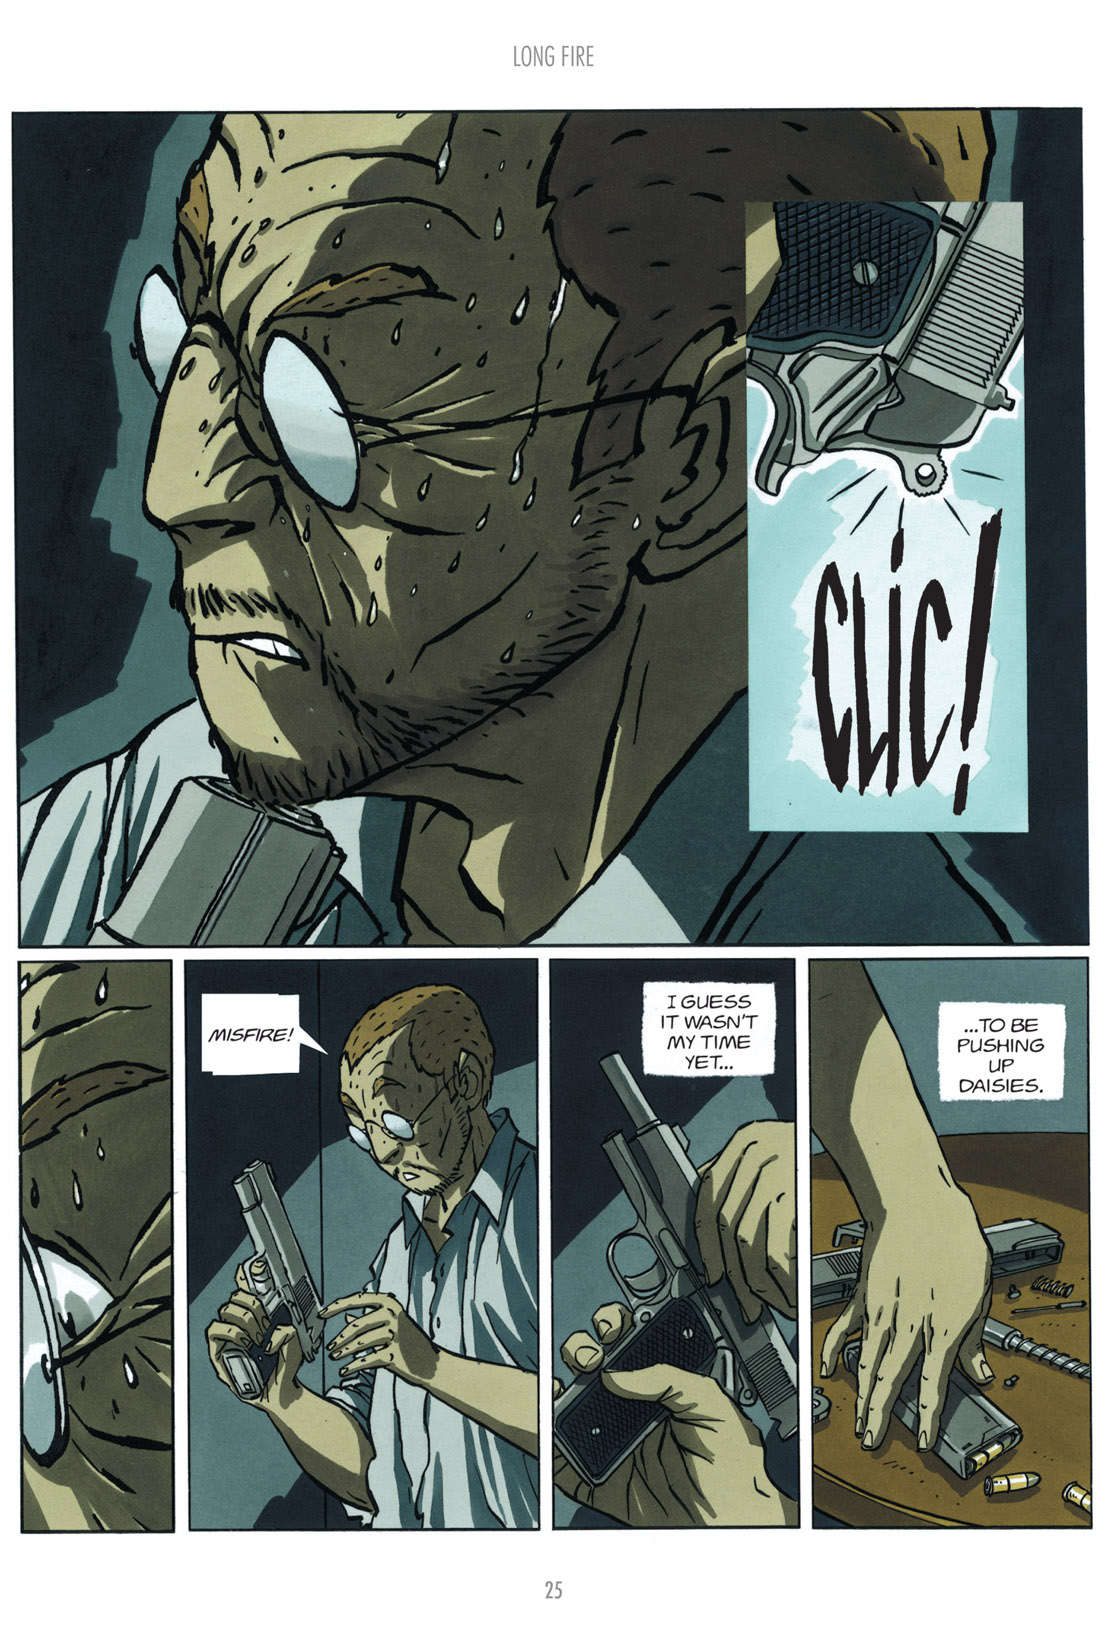 Read online The Killer comic -  Issue # TPB 1 - 64